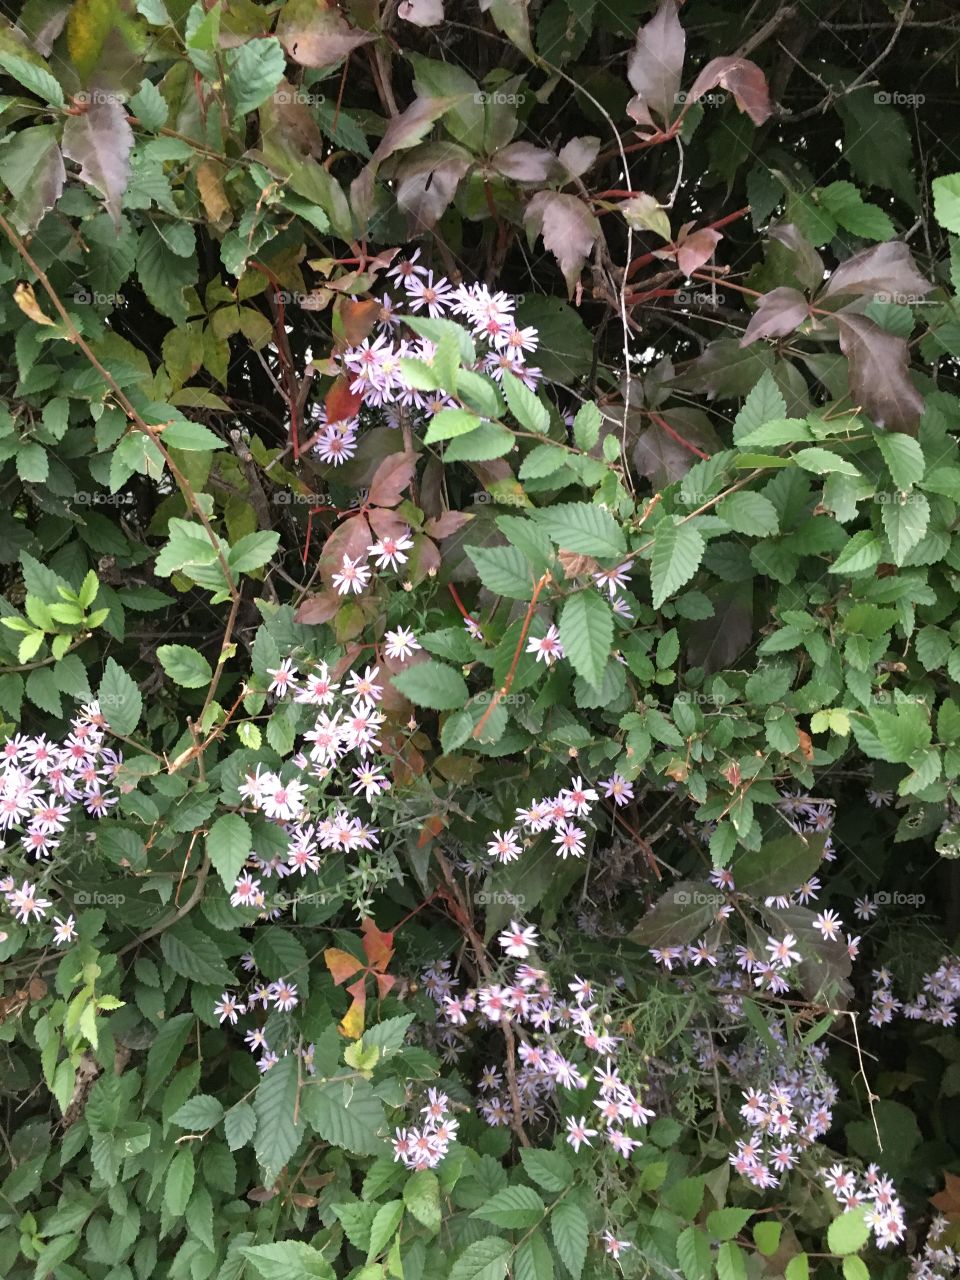 Pink Flowers on Tree-Octobre 10 2018- Montreal, Quebec, Canada